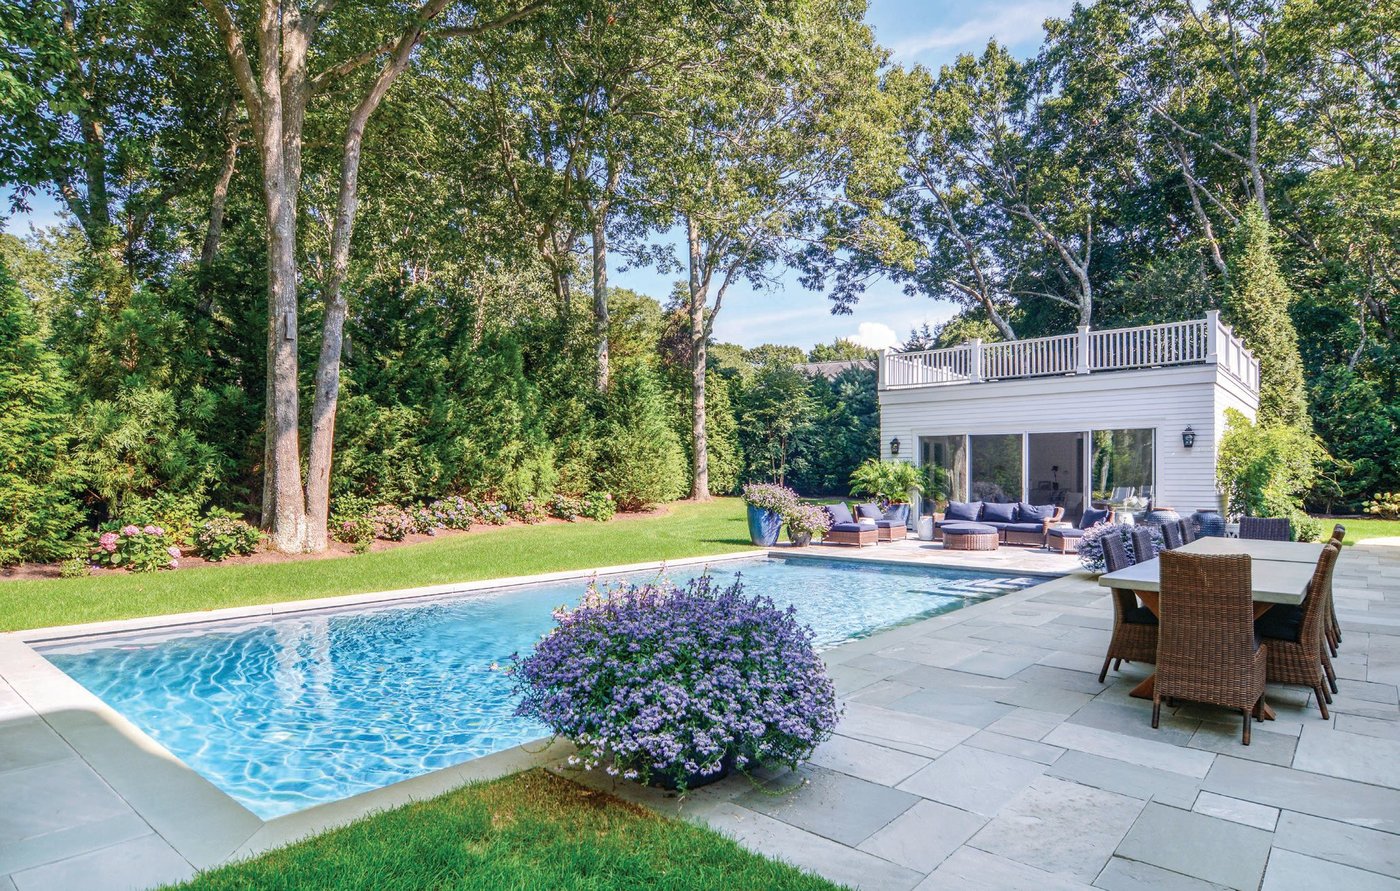 The 20-by-40-foot pool is surrounded by double-layer bluestone paving PHOTO COURTESY OF SAUNDERS & ASSOCIATES